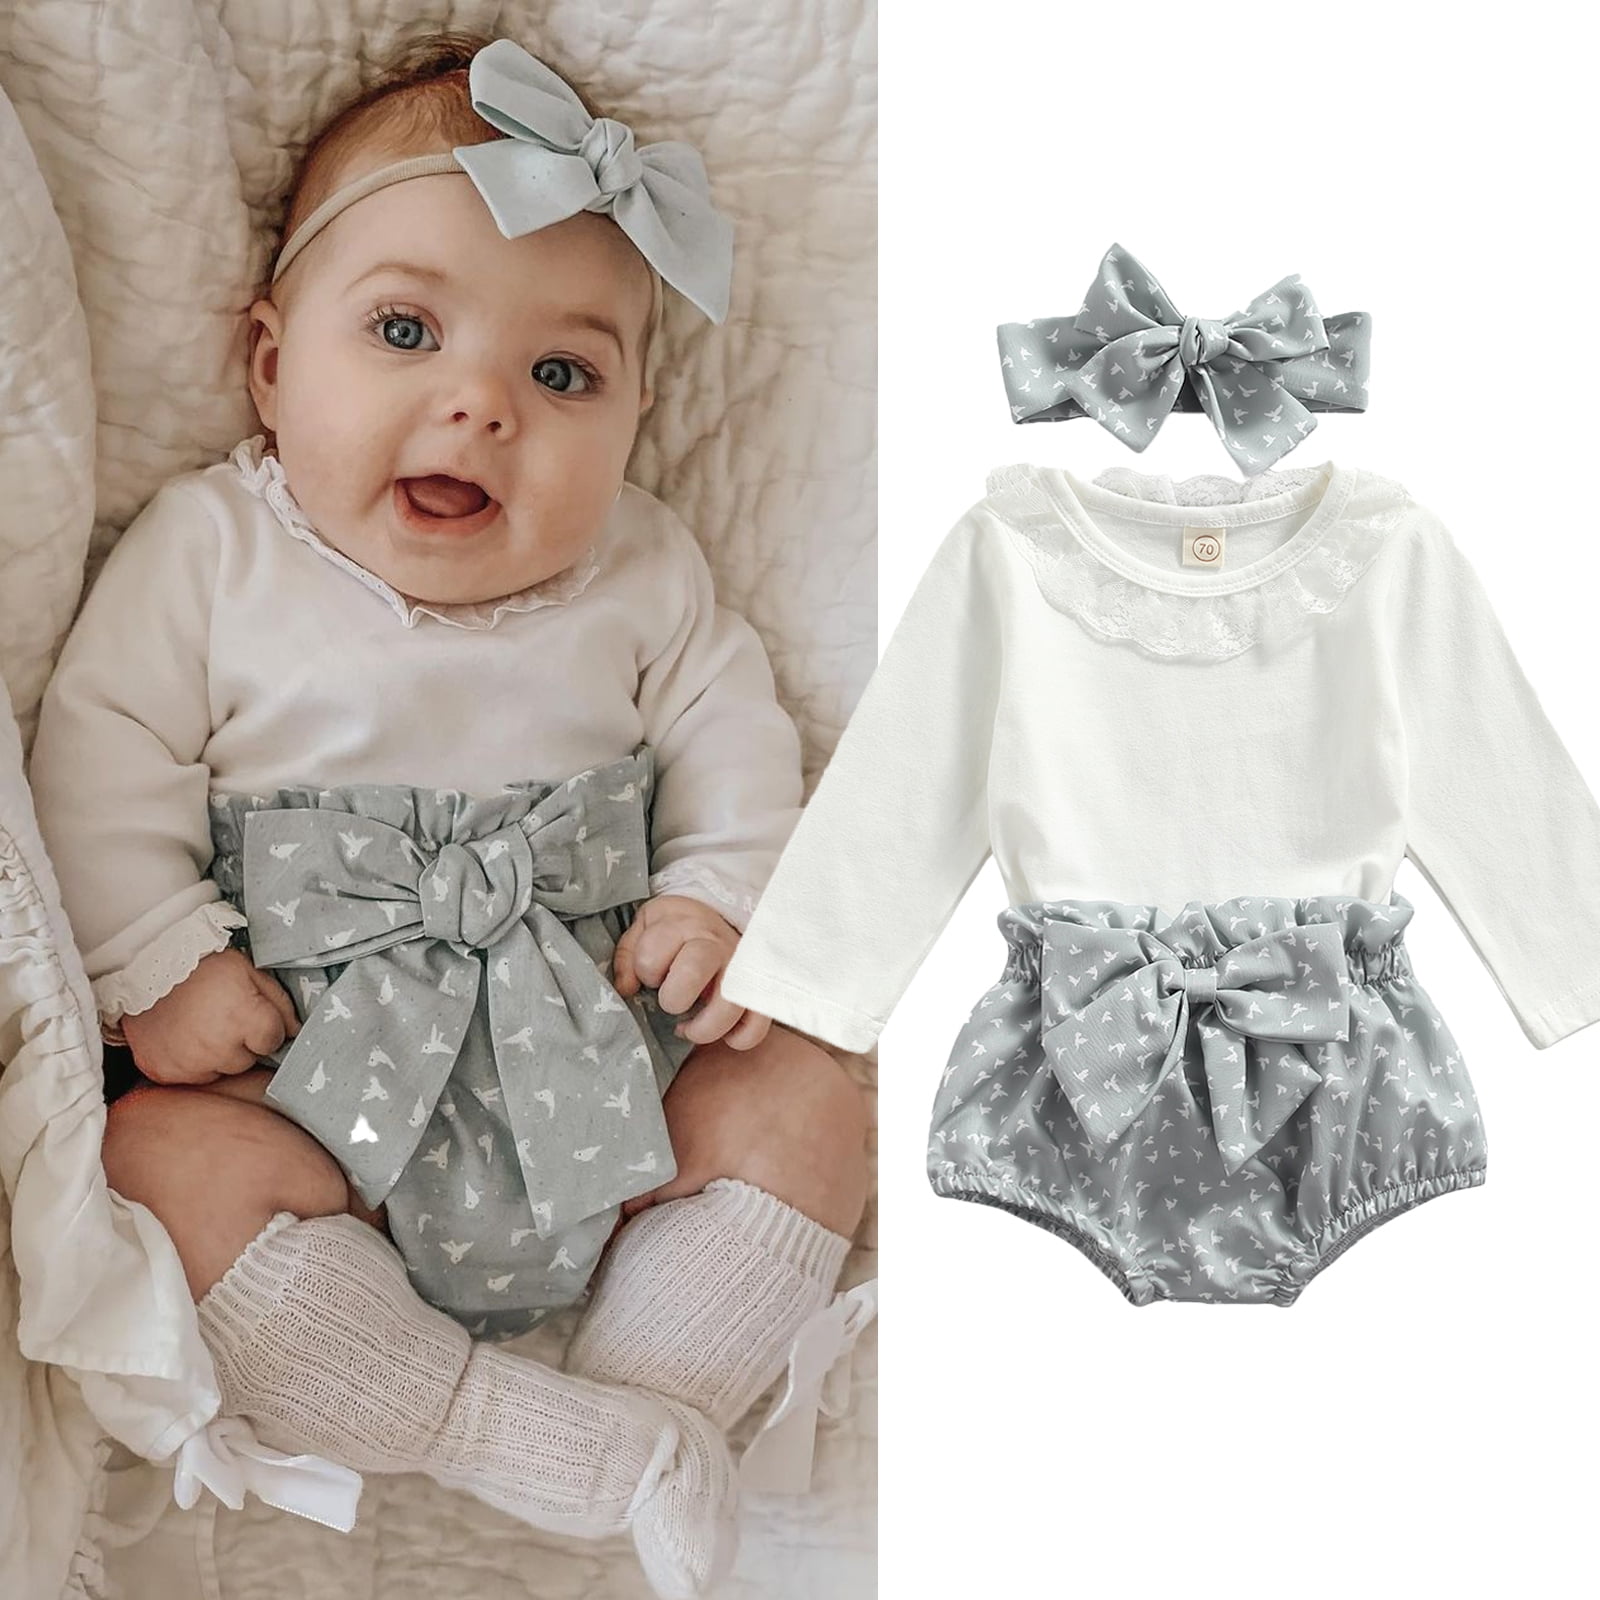 Canrulo Newborn Baby Girl Fall Winter Clothes Outfits Lace Romper Bodysuit  Floral Shorts Pants Headband Set Gray 6-12 Months